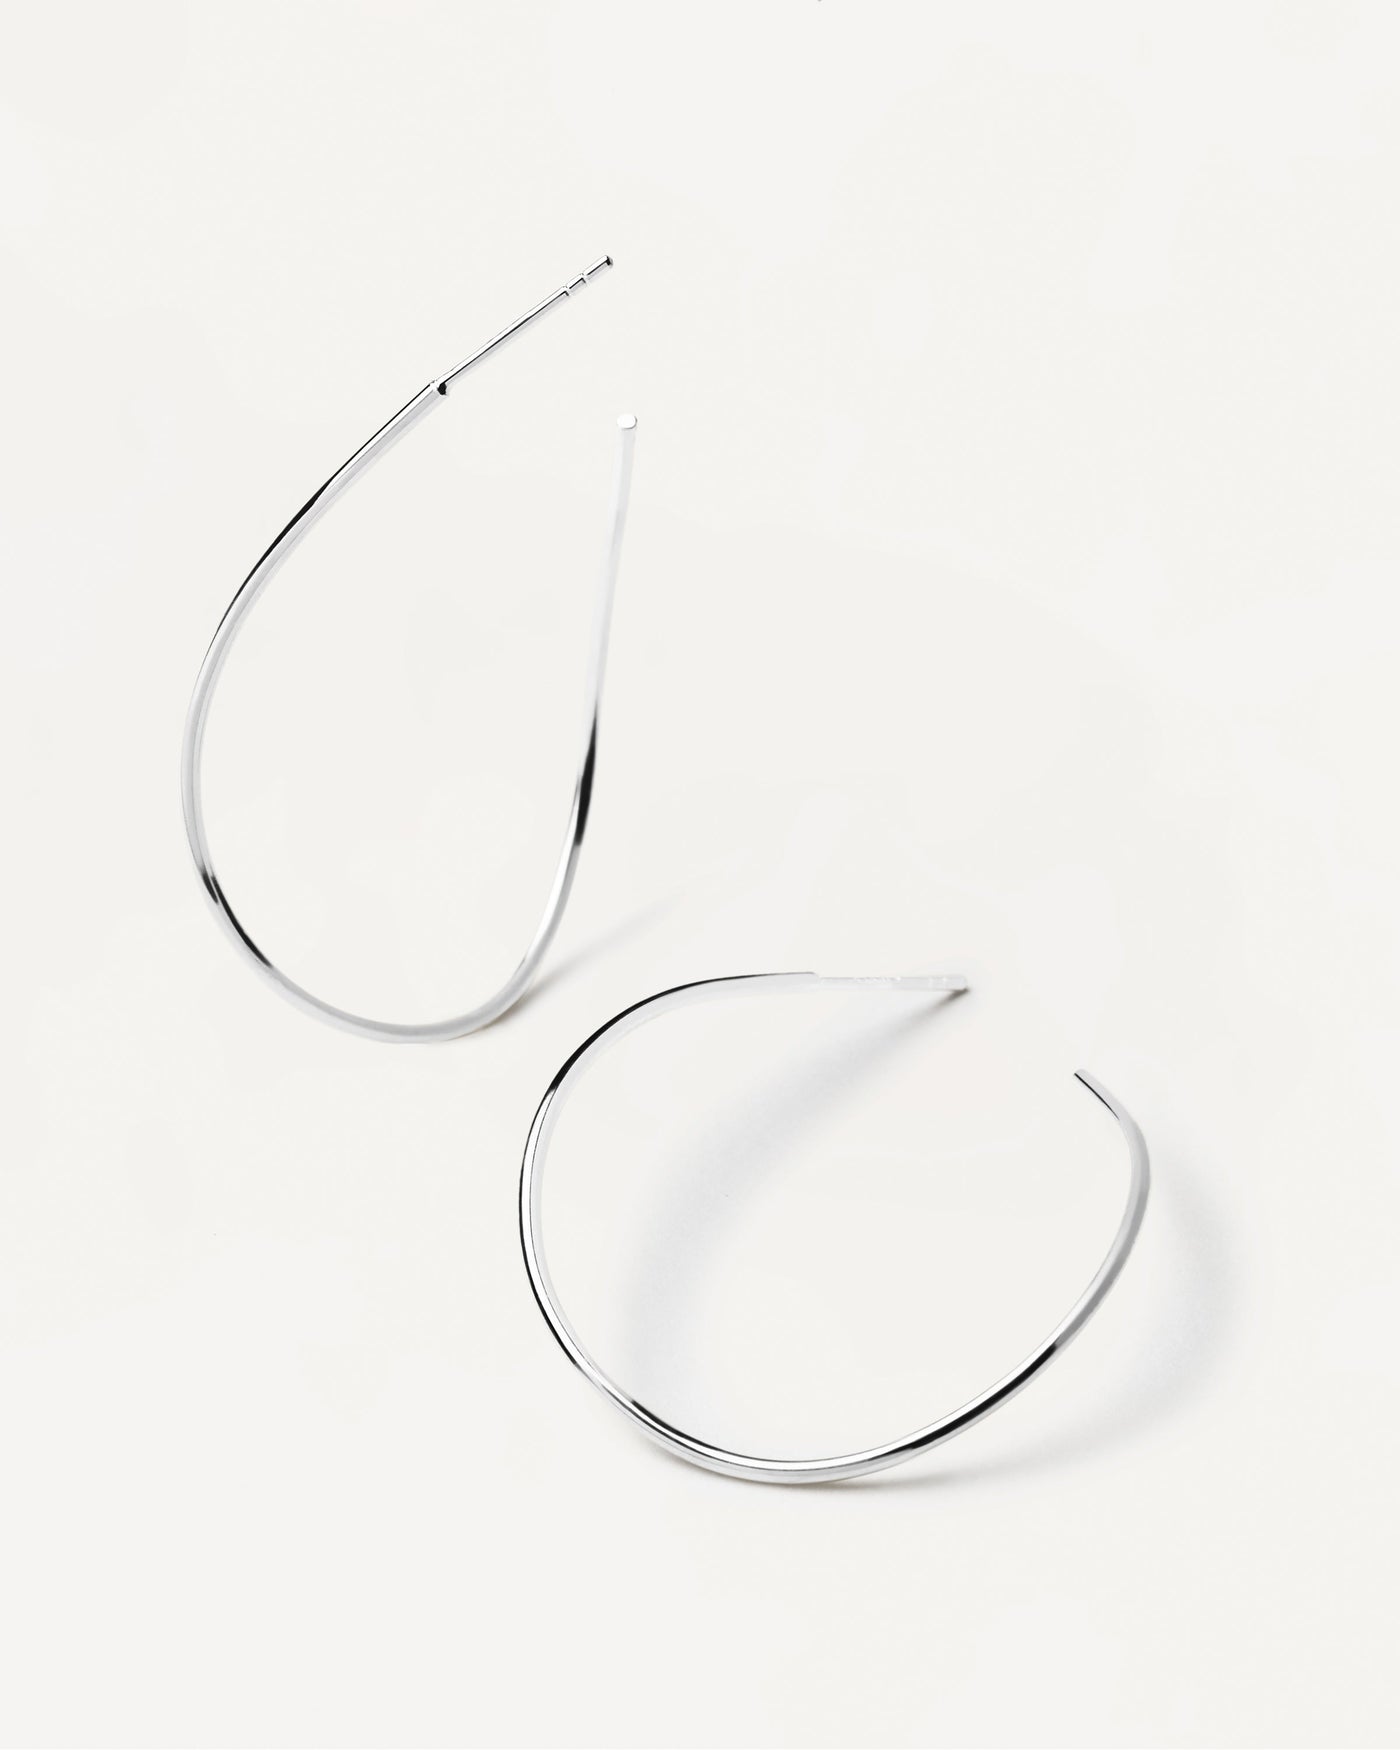 2023 Selection | Niko Silver Earrings. Open loop wavy oval hoop earrings in 925 sterling silver. Get the latest arrival from PDPAOLA. Place your order safely and get this Best Seller. Free Shipping.